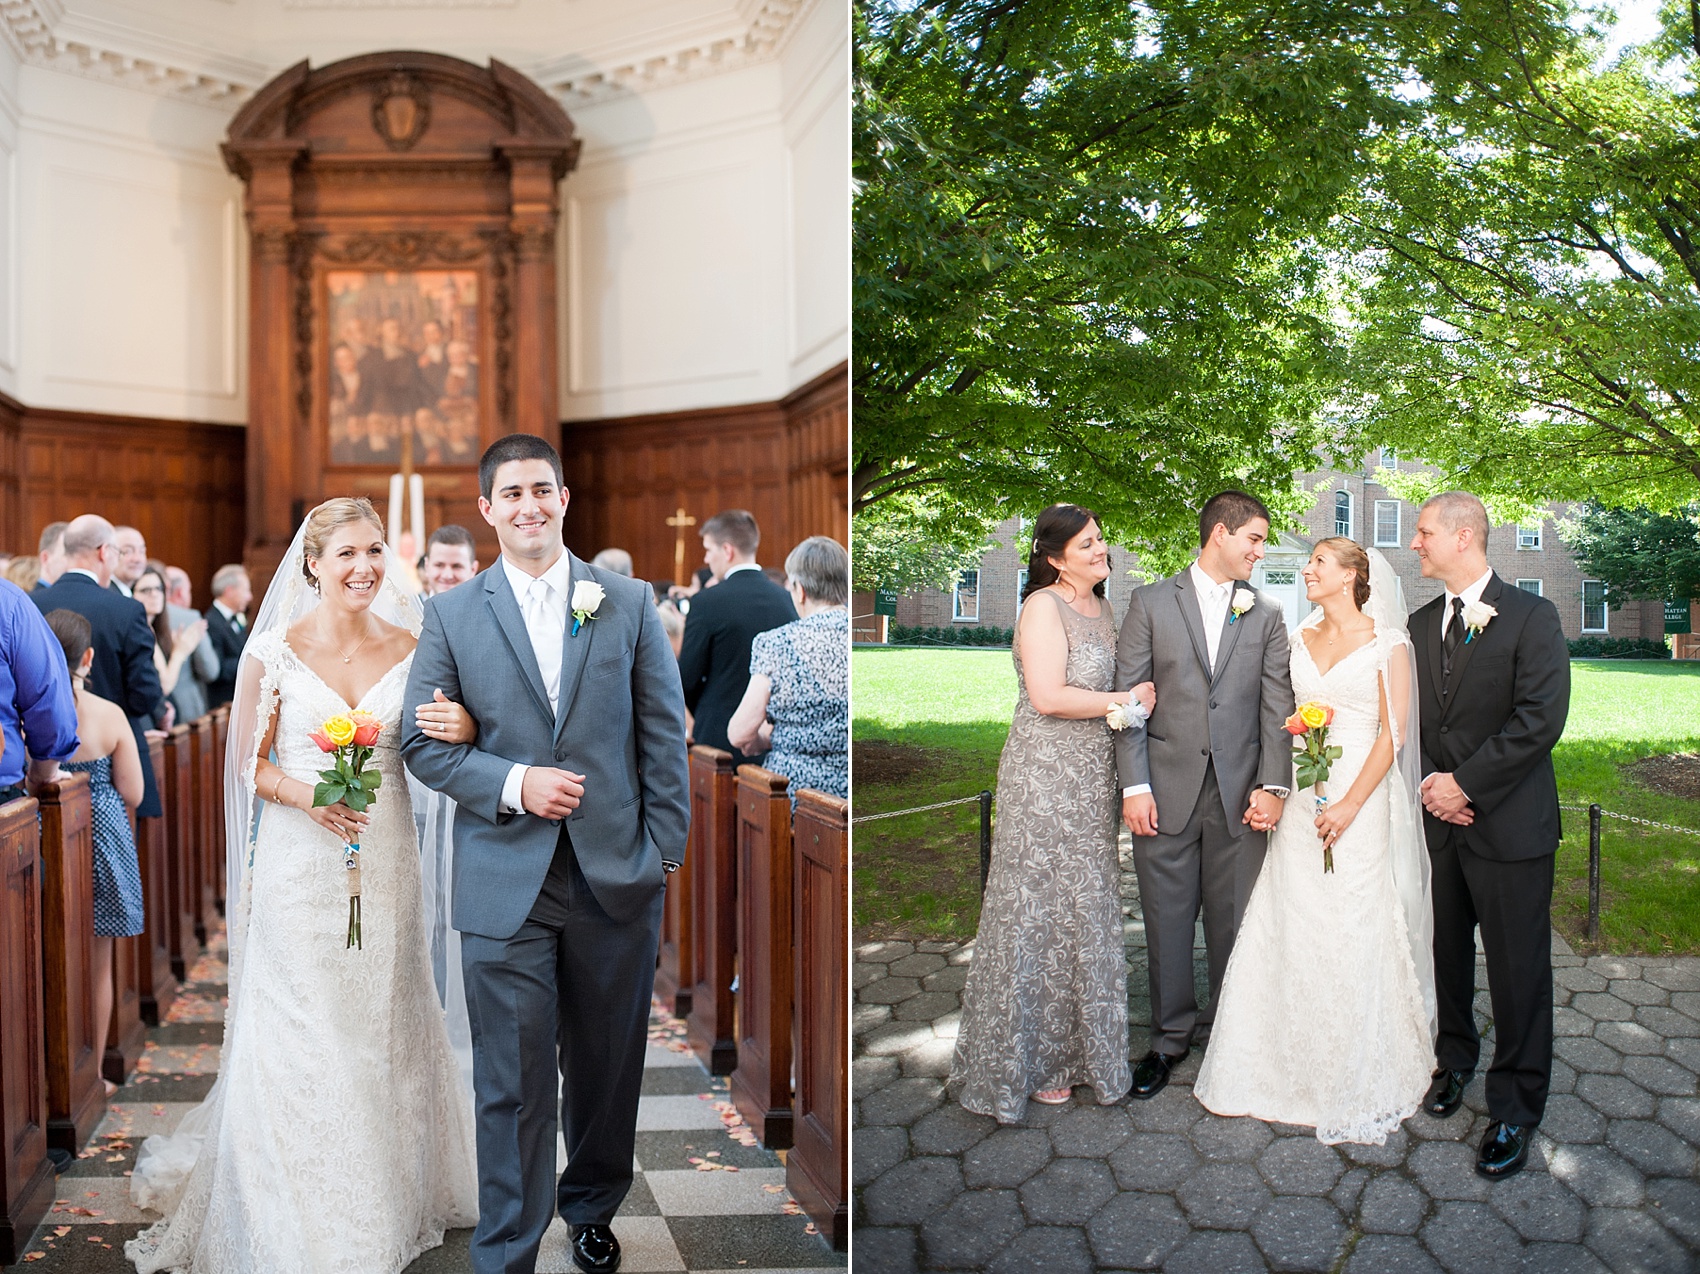 Manhattan College ceremony wedding photos in New York, by Mikkel Paige Photography.